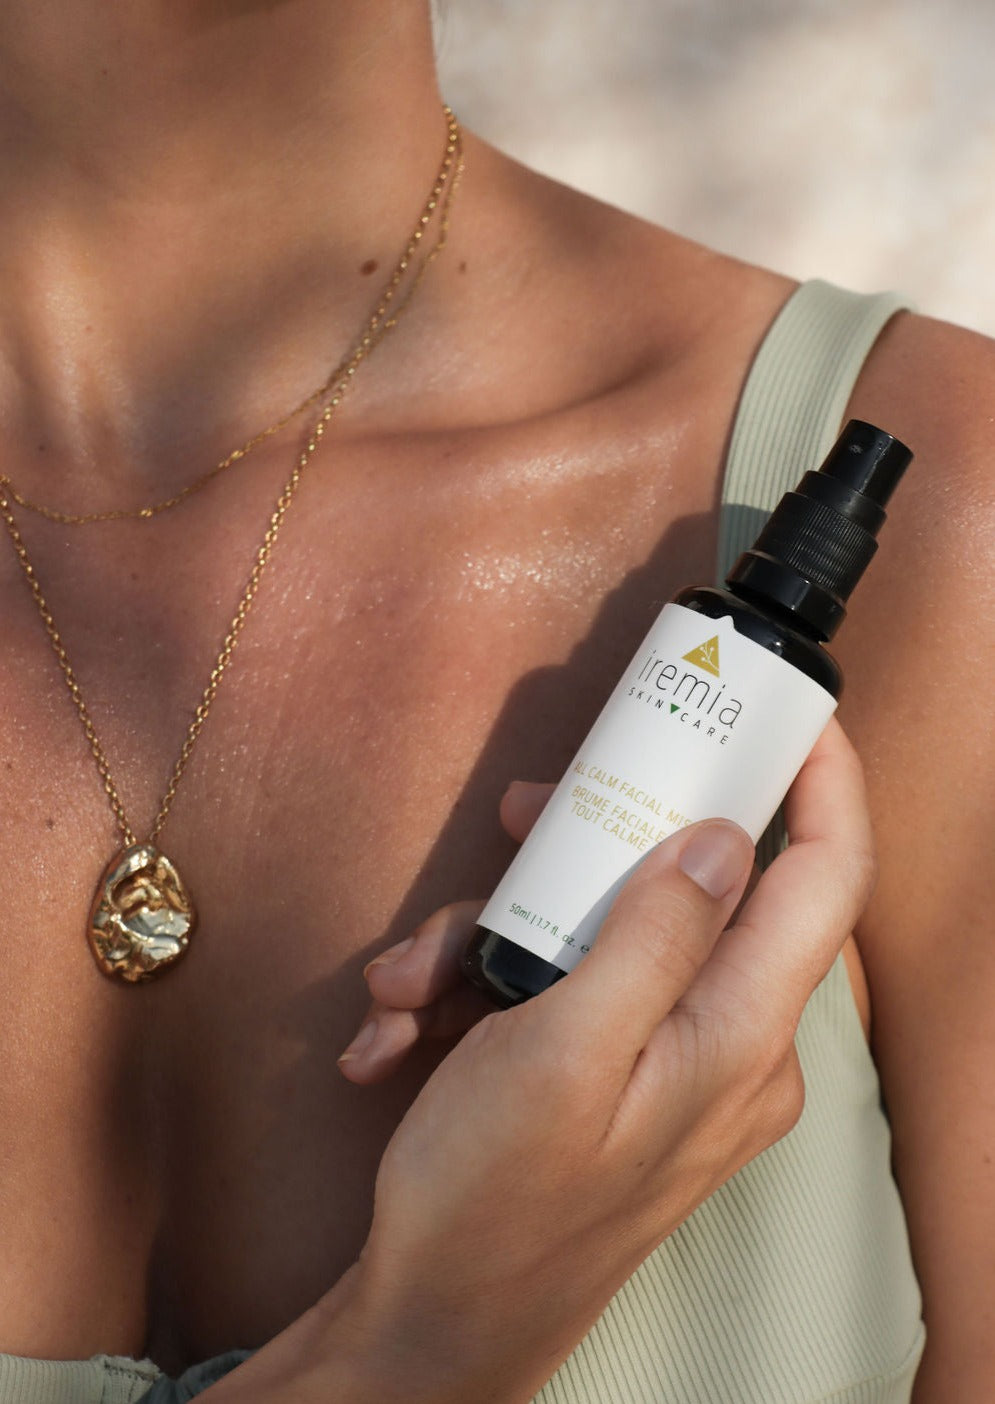 Our All-Calm Facial Mist is bursting with natural ingredients that soothe, hydrate and plump your skin in a single spritz. Its blend of extracts and vegan, non-GMO black oat extract and lecithin are more hydrating than hyaluronic acid and glycerin combined. Niacinamide soothes redness and helps with pores while it lightens pigmentation.